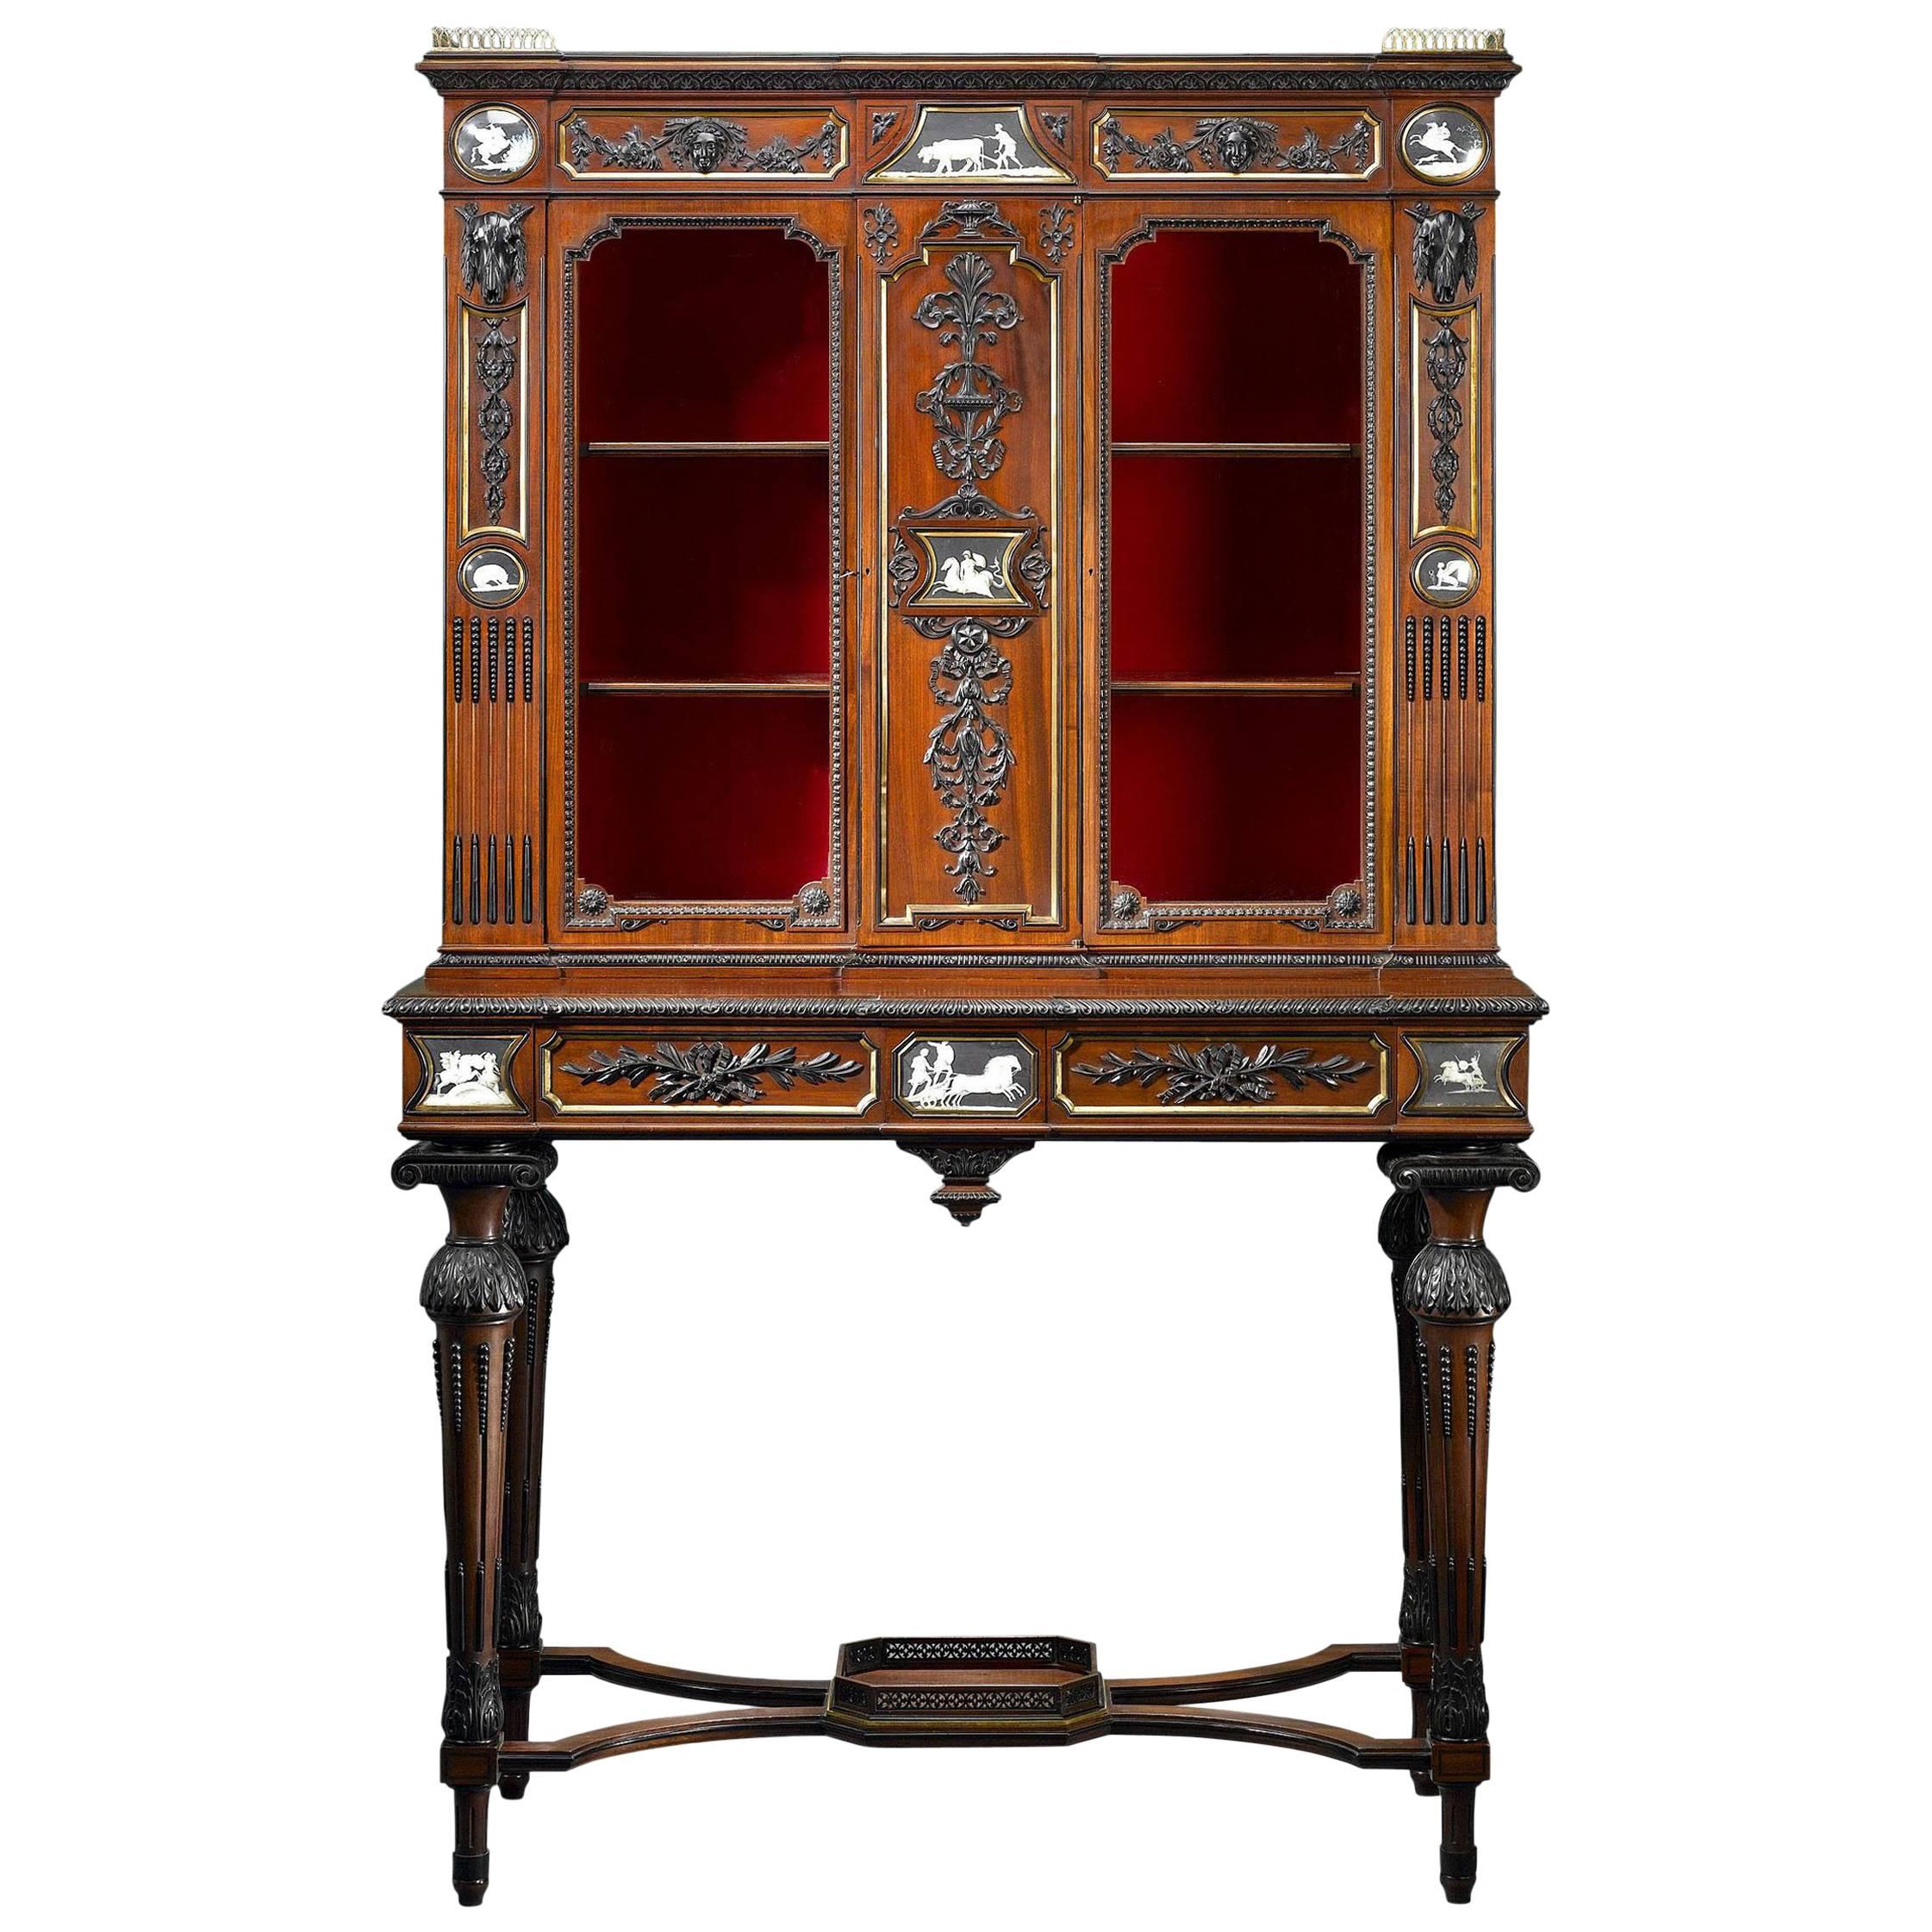 19th Century English Etruscan-Style Cabinet